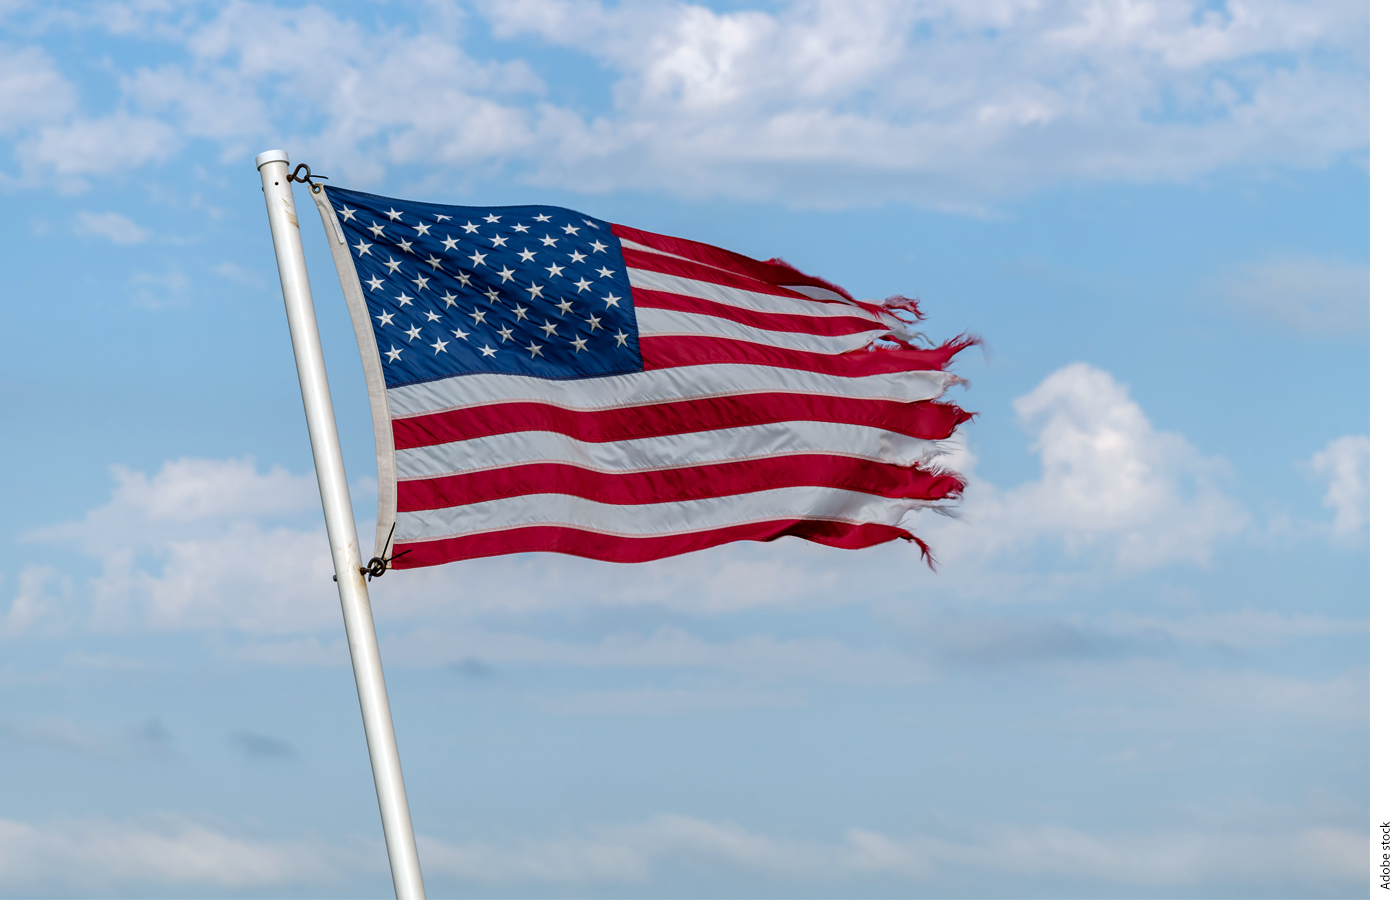 Image of an American flag on a pole with frayed ends